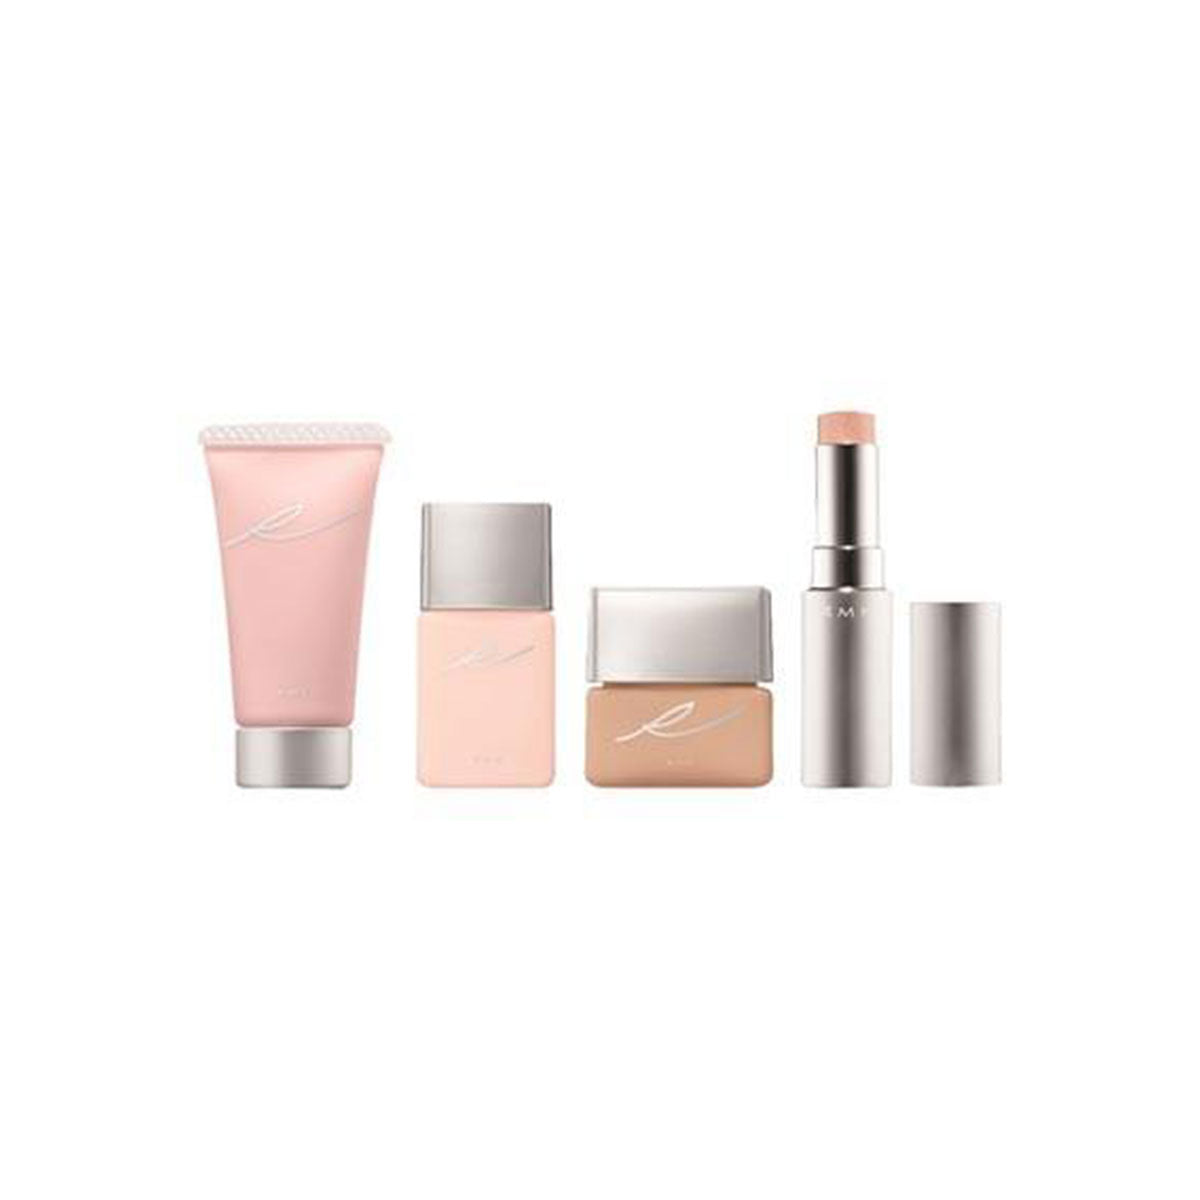 Pre Makeup Foundation Collection Kit Limited Edition #B